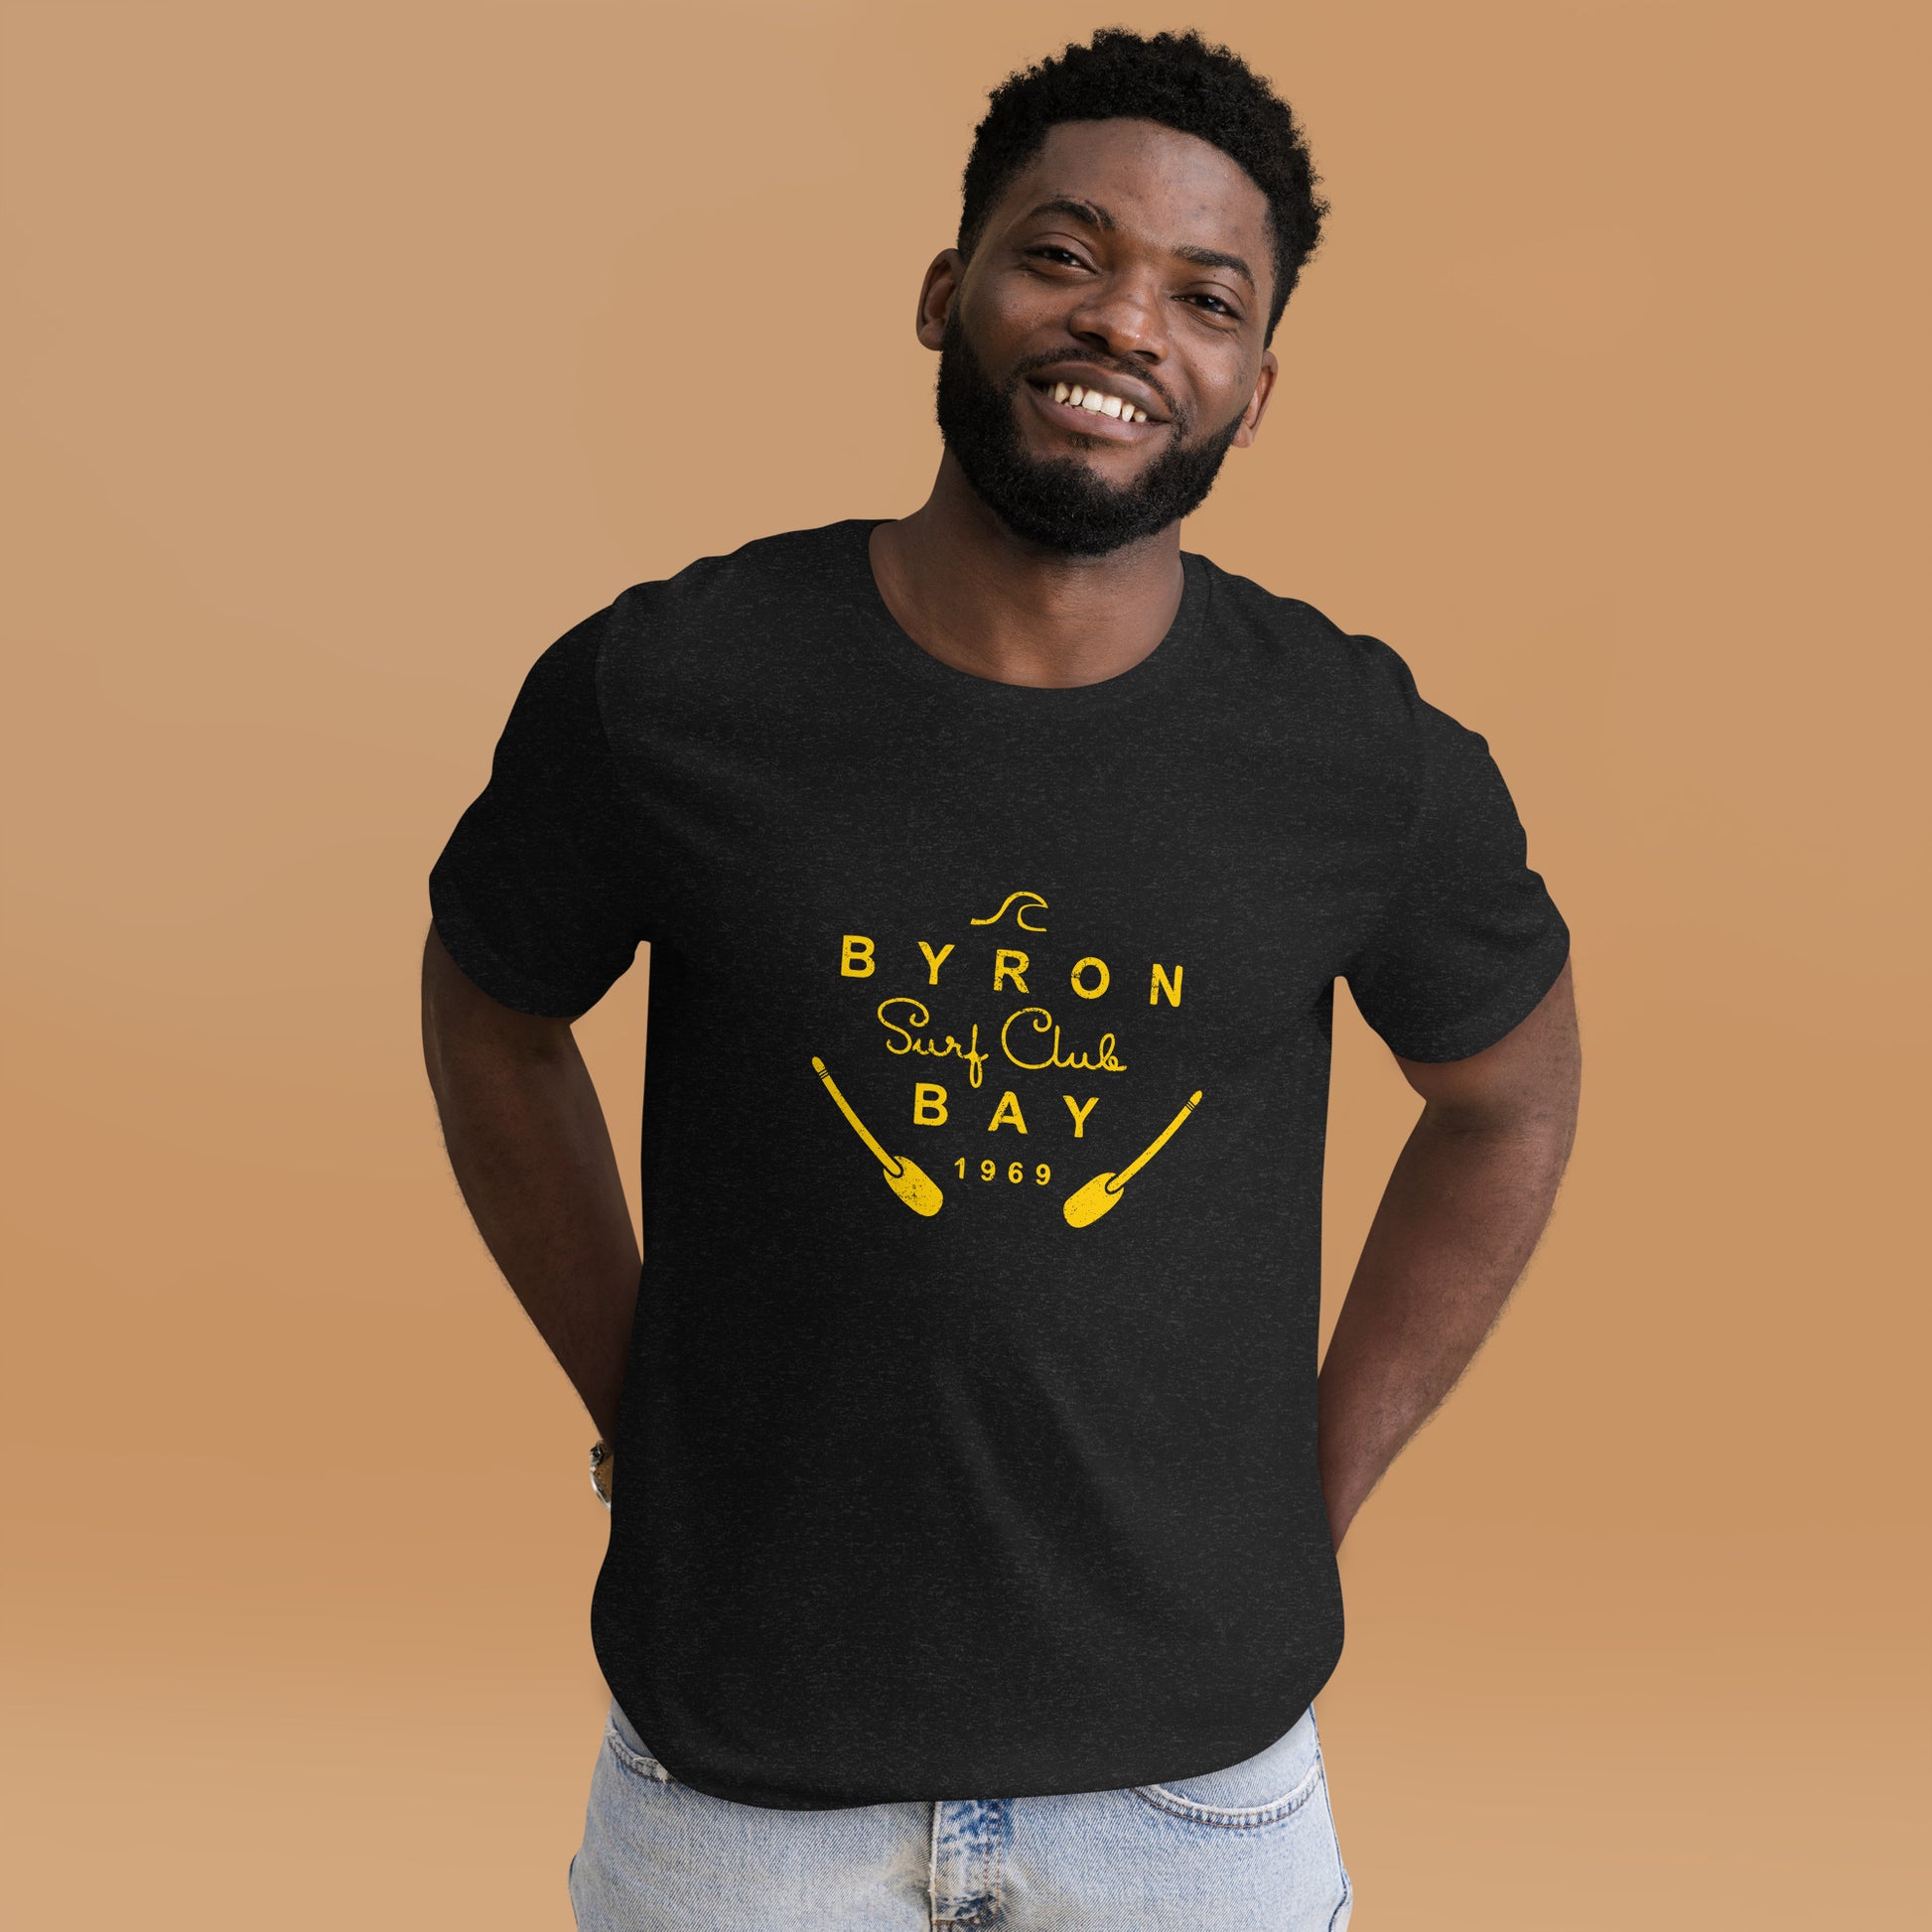  Unisex T-Shirt - Black Heather - Front view, man standing with both hands in back pockets - Byron Bay Surf Club logo on front - Genuine Byron Bay Merchandise | Produced by Go Sea Kayak Byron Bay 